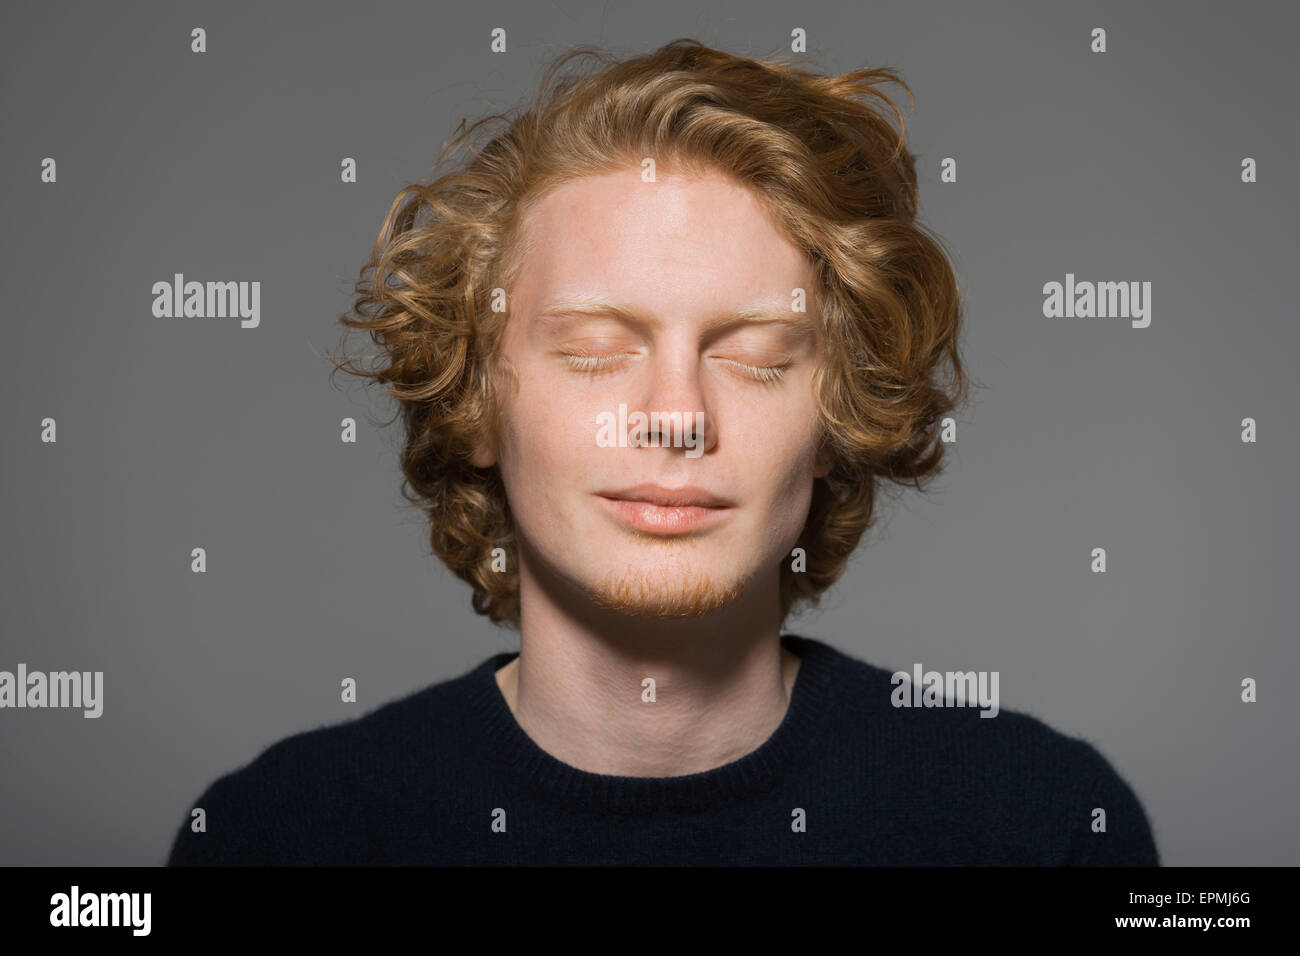 Portrait of young man with closed eyes Stock Photo